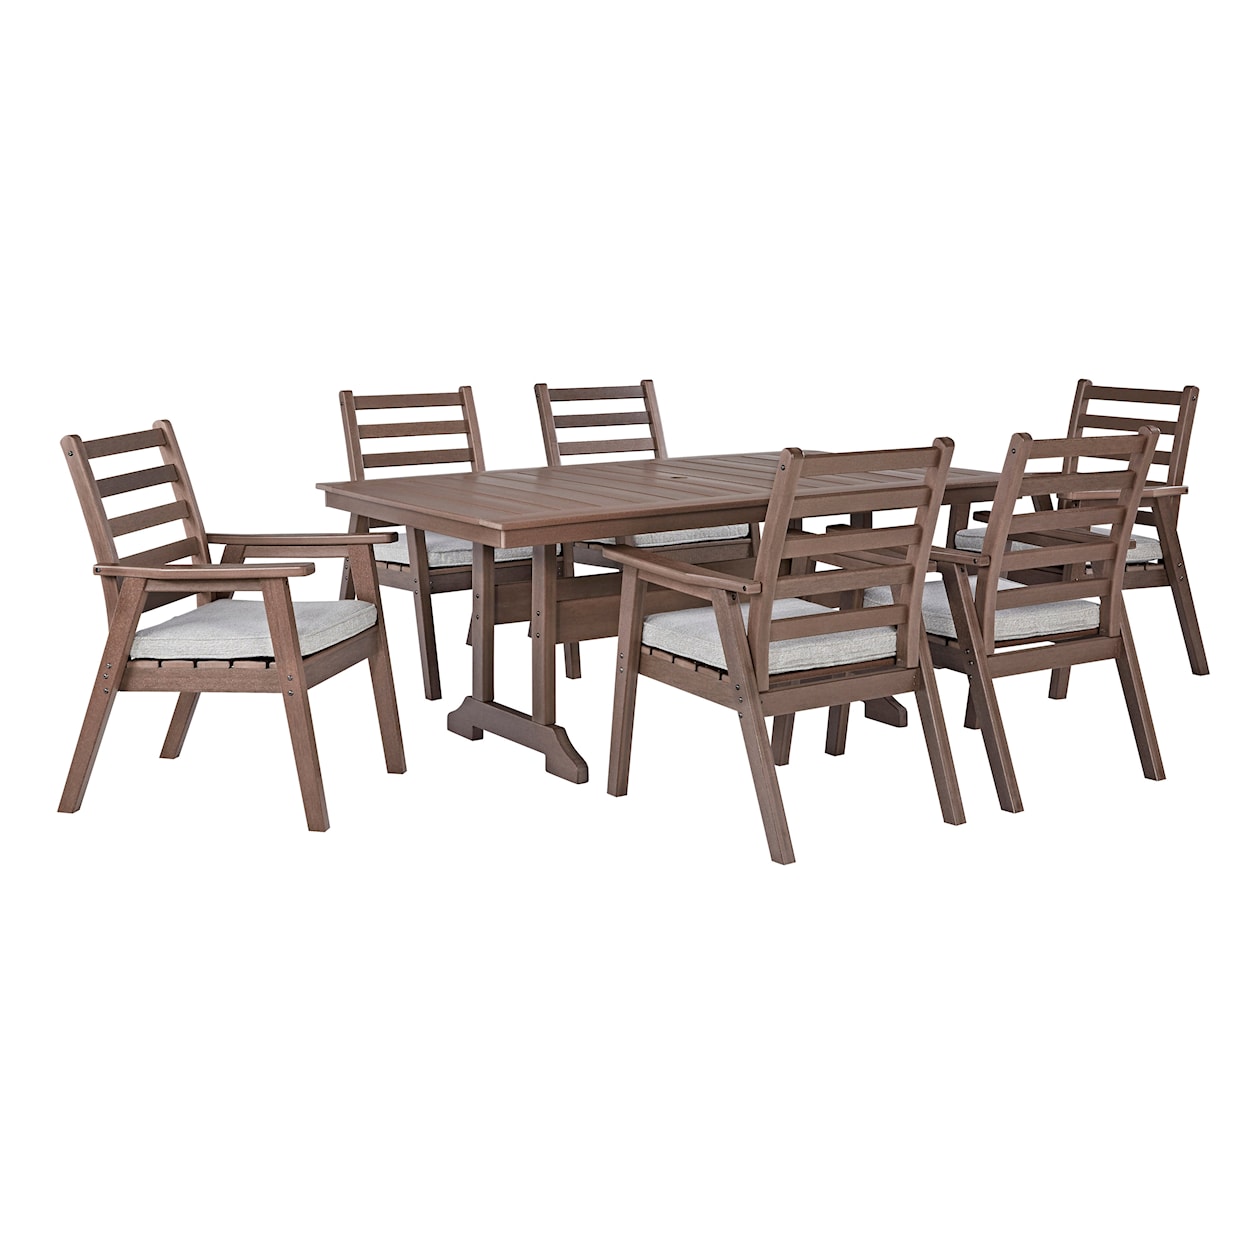 Michael Alan Select Emmeline Outdoor Dining Table